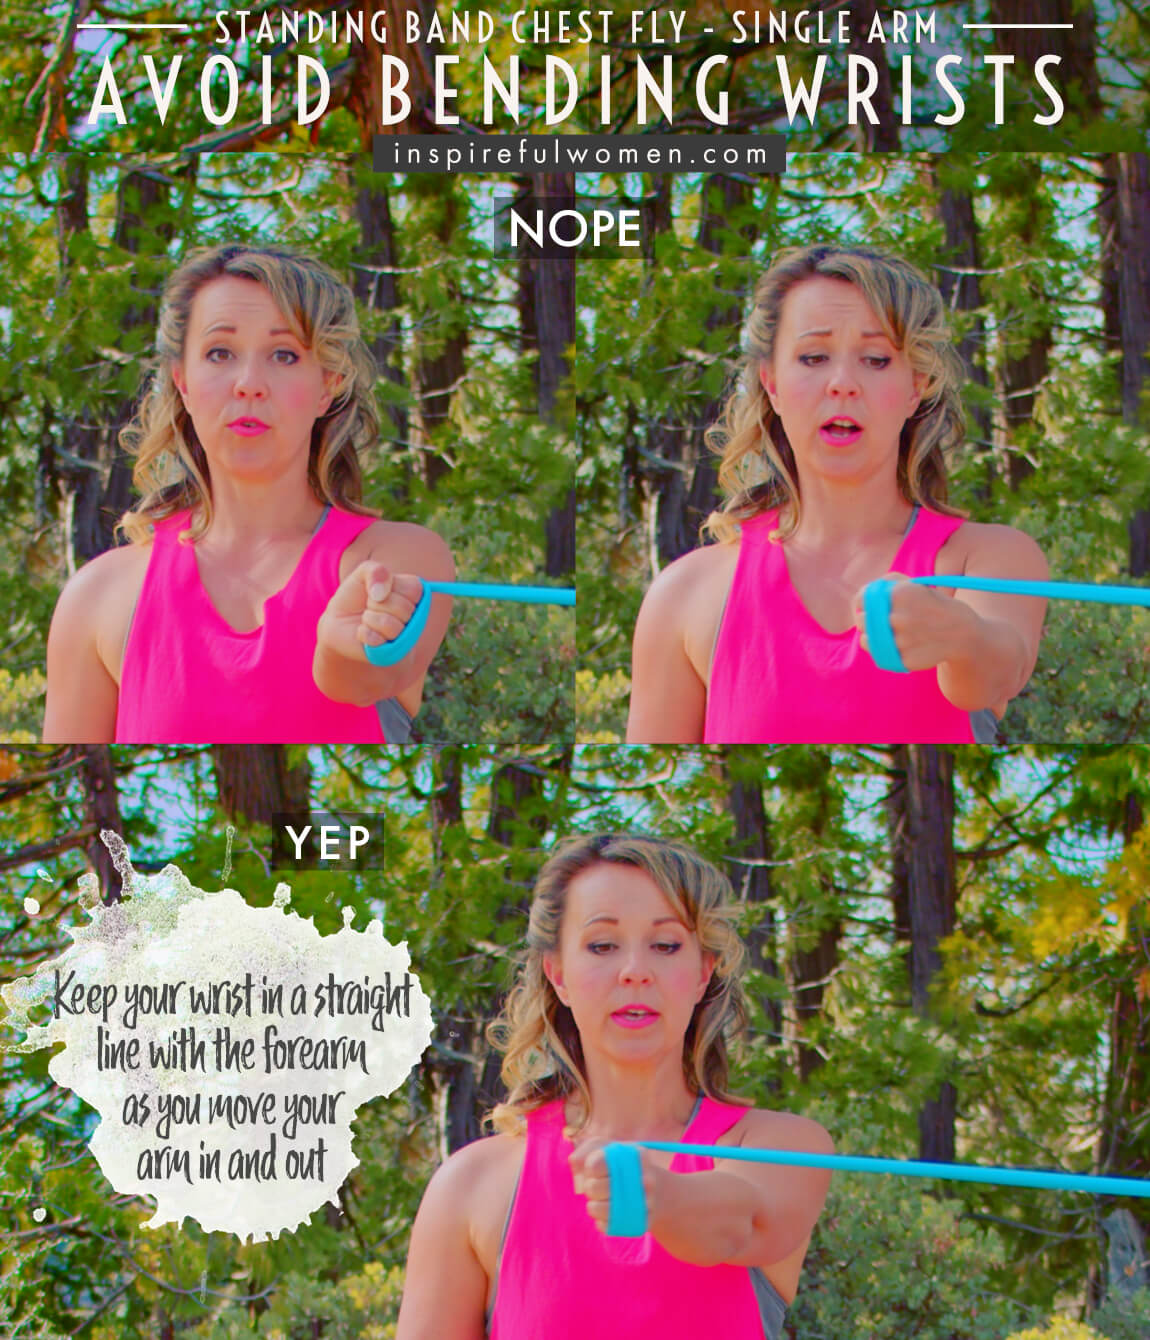 avoid-bending-wrists-single-arm-standing-band-chest-fly-exercise-common-mistakes